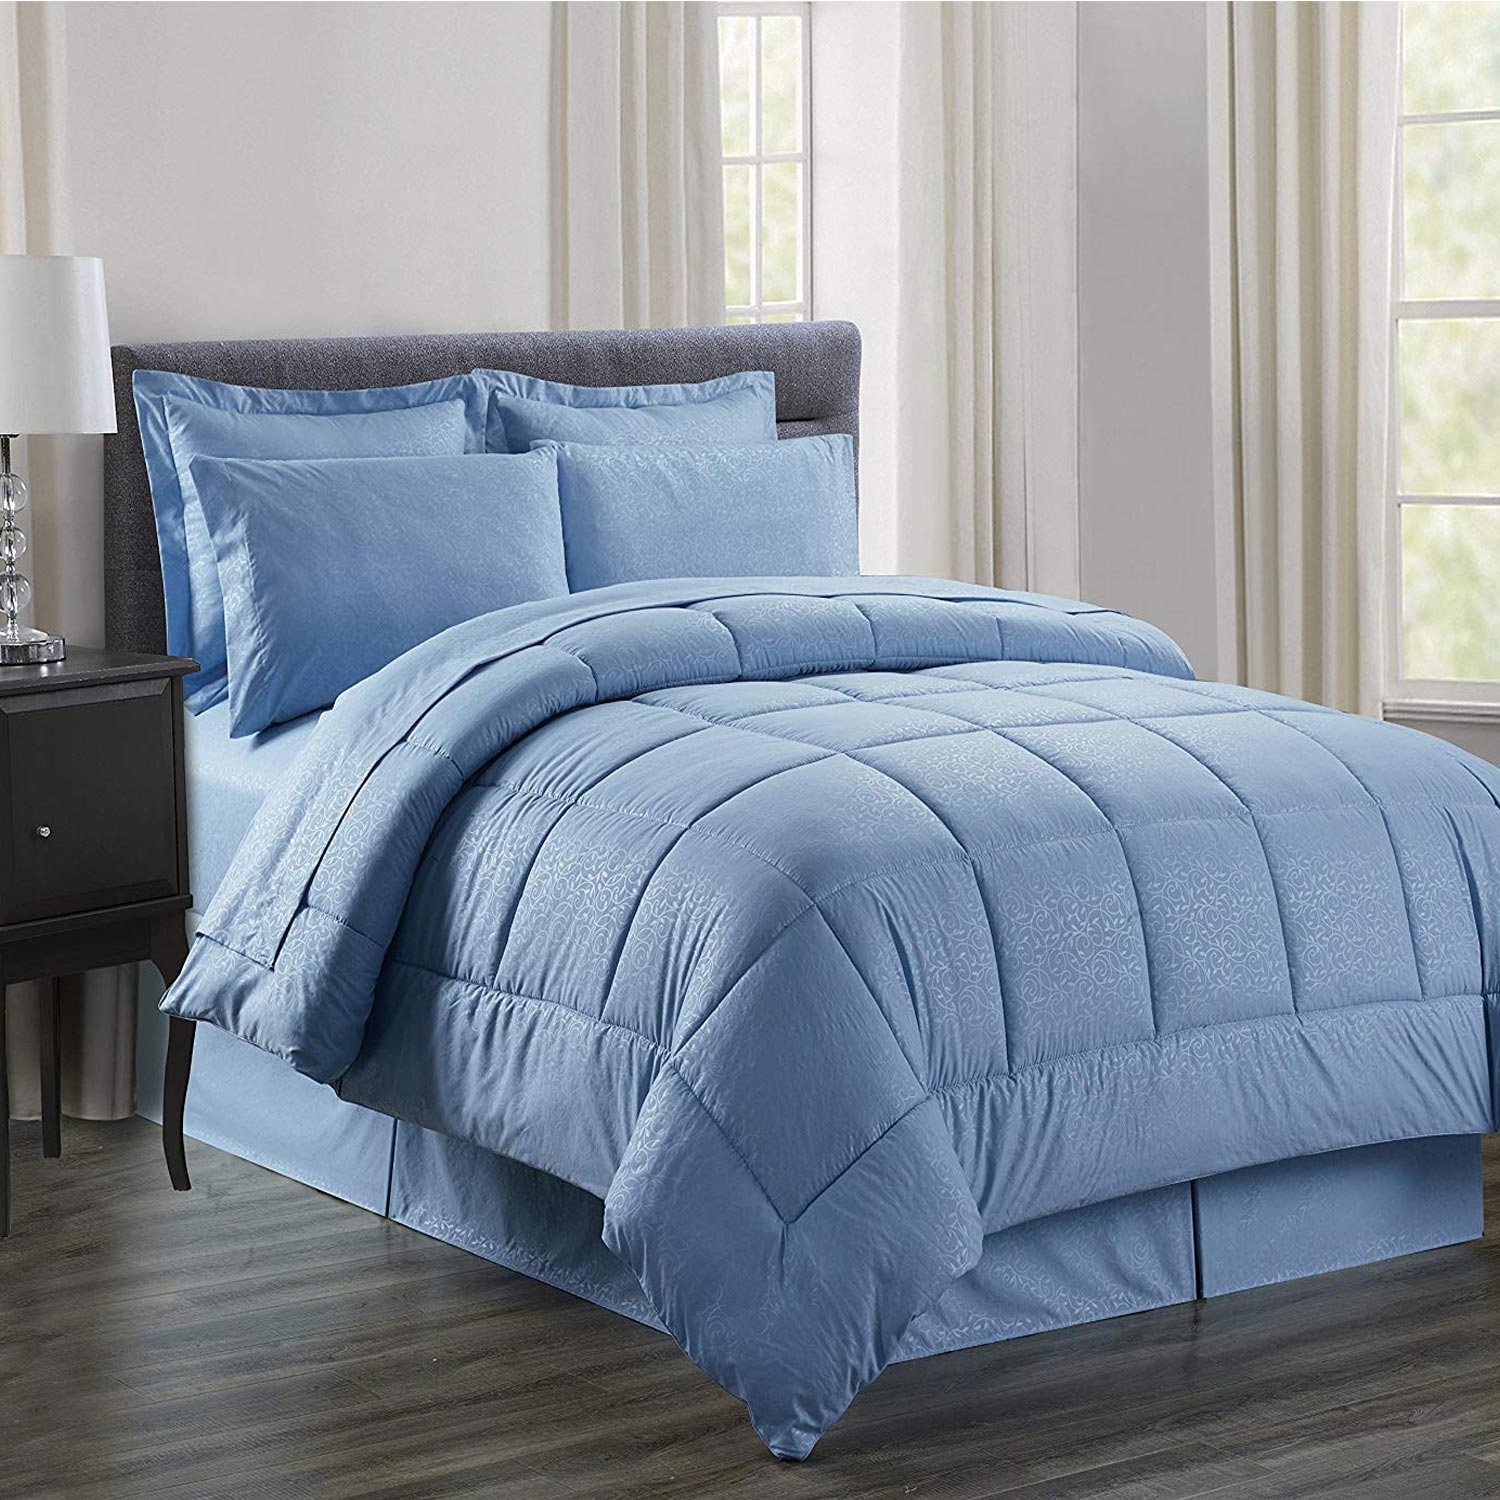 8-Piece Silky Soft Beautiful Design Complete Bed-in-a-Bag Comforter Set